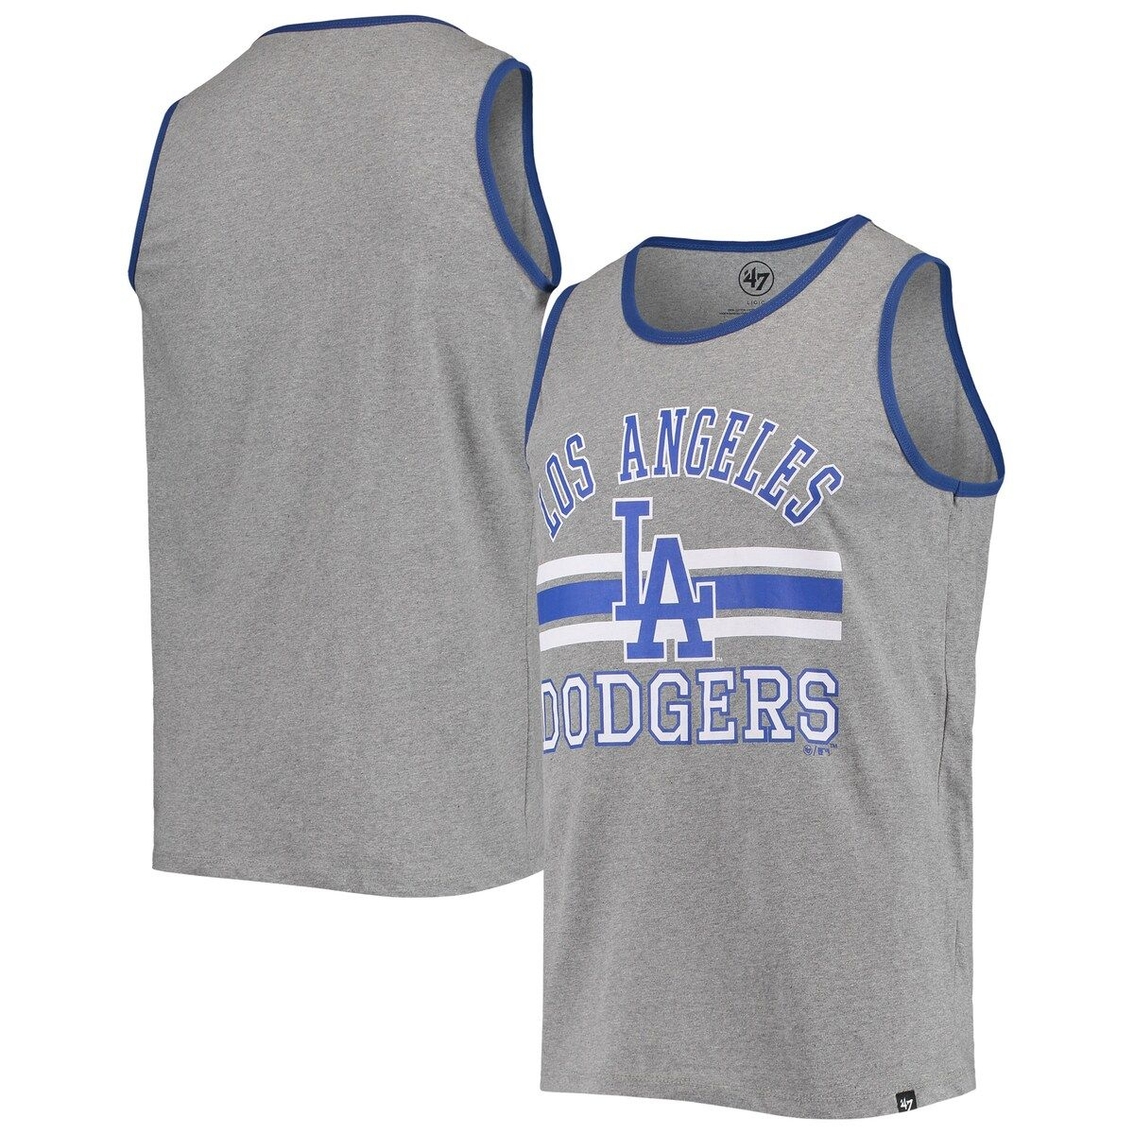 '47 Men's Heathered Gray Los Angeles Dodgers Edge Super Rival Tank Top - Image 2 of 4